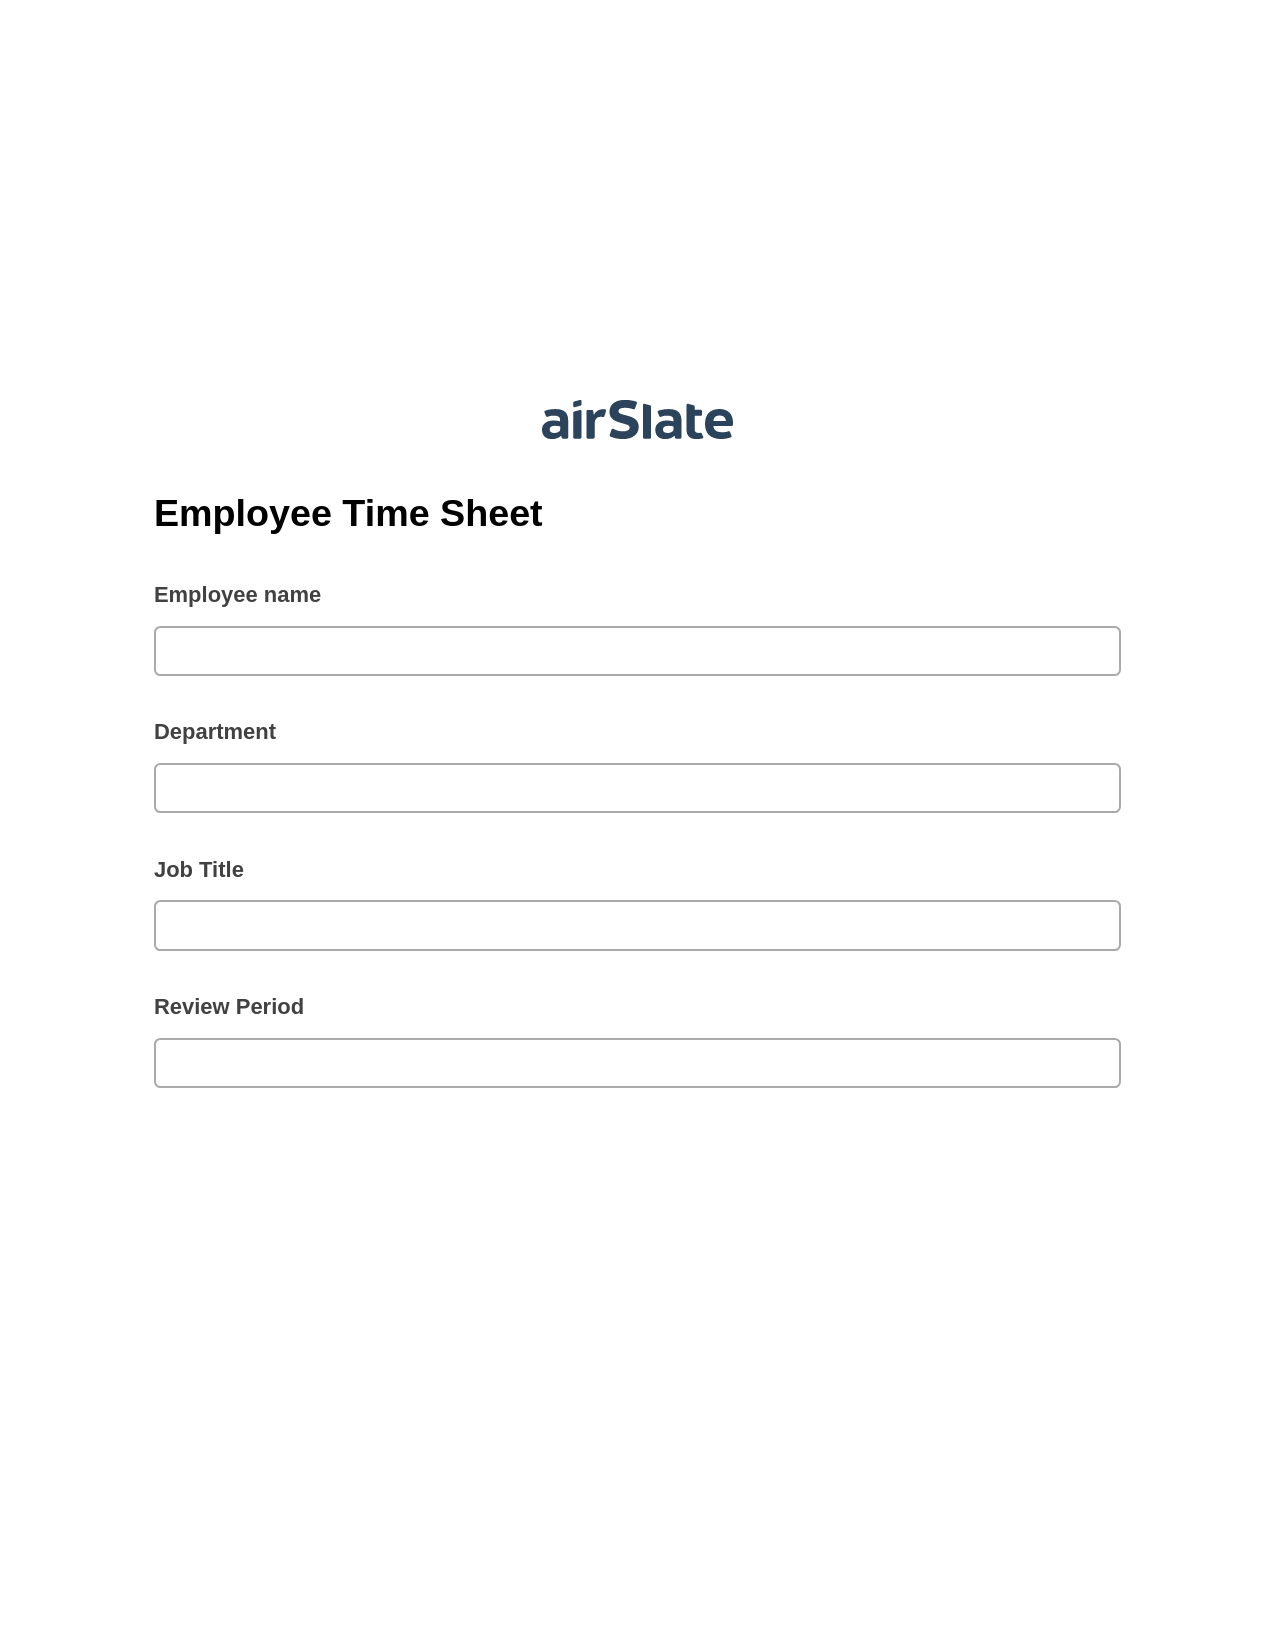 Multirole Employee Time Sheet Pre-fill from Google Sheets Bot, Update Audit Trail Bot, Archive to Google Drive Bot